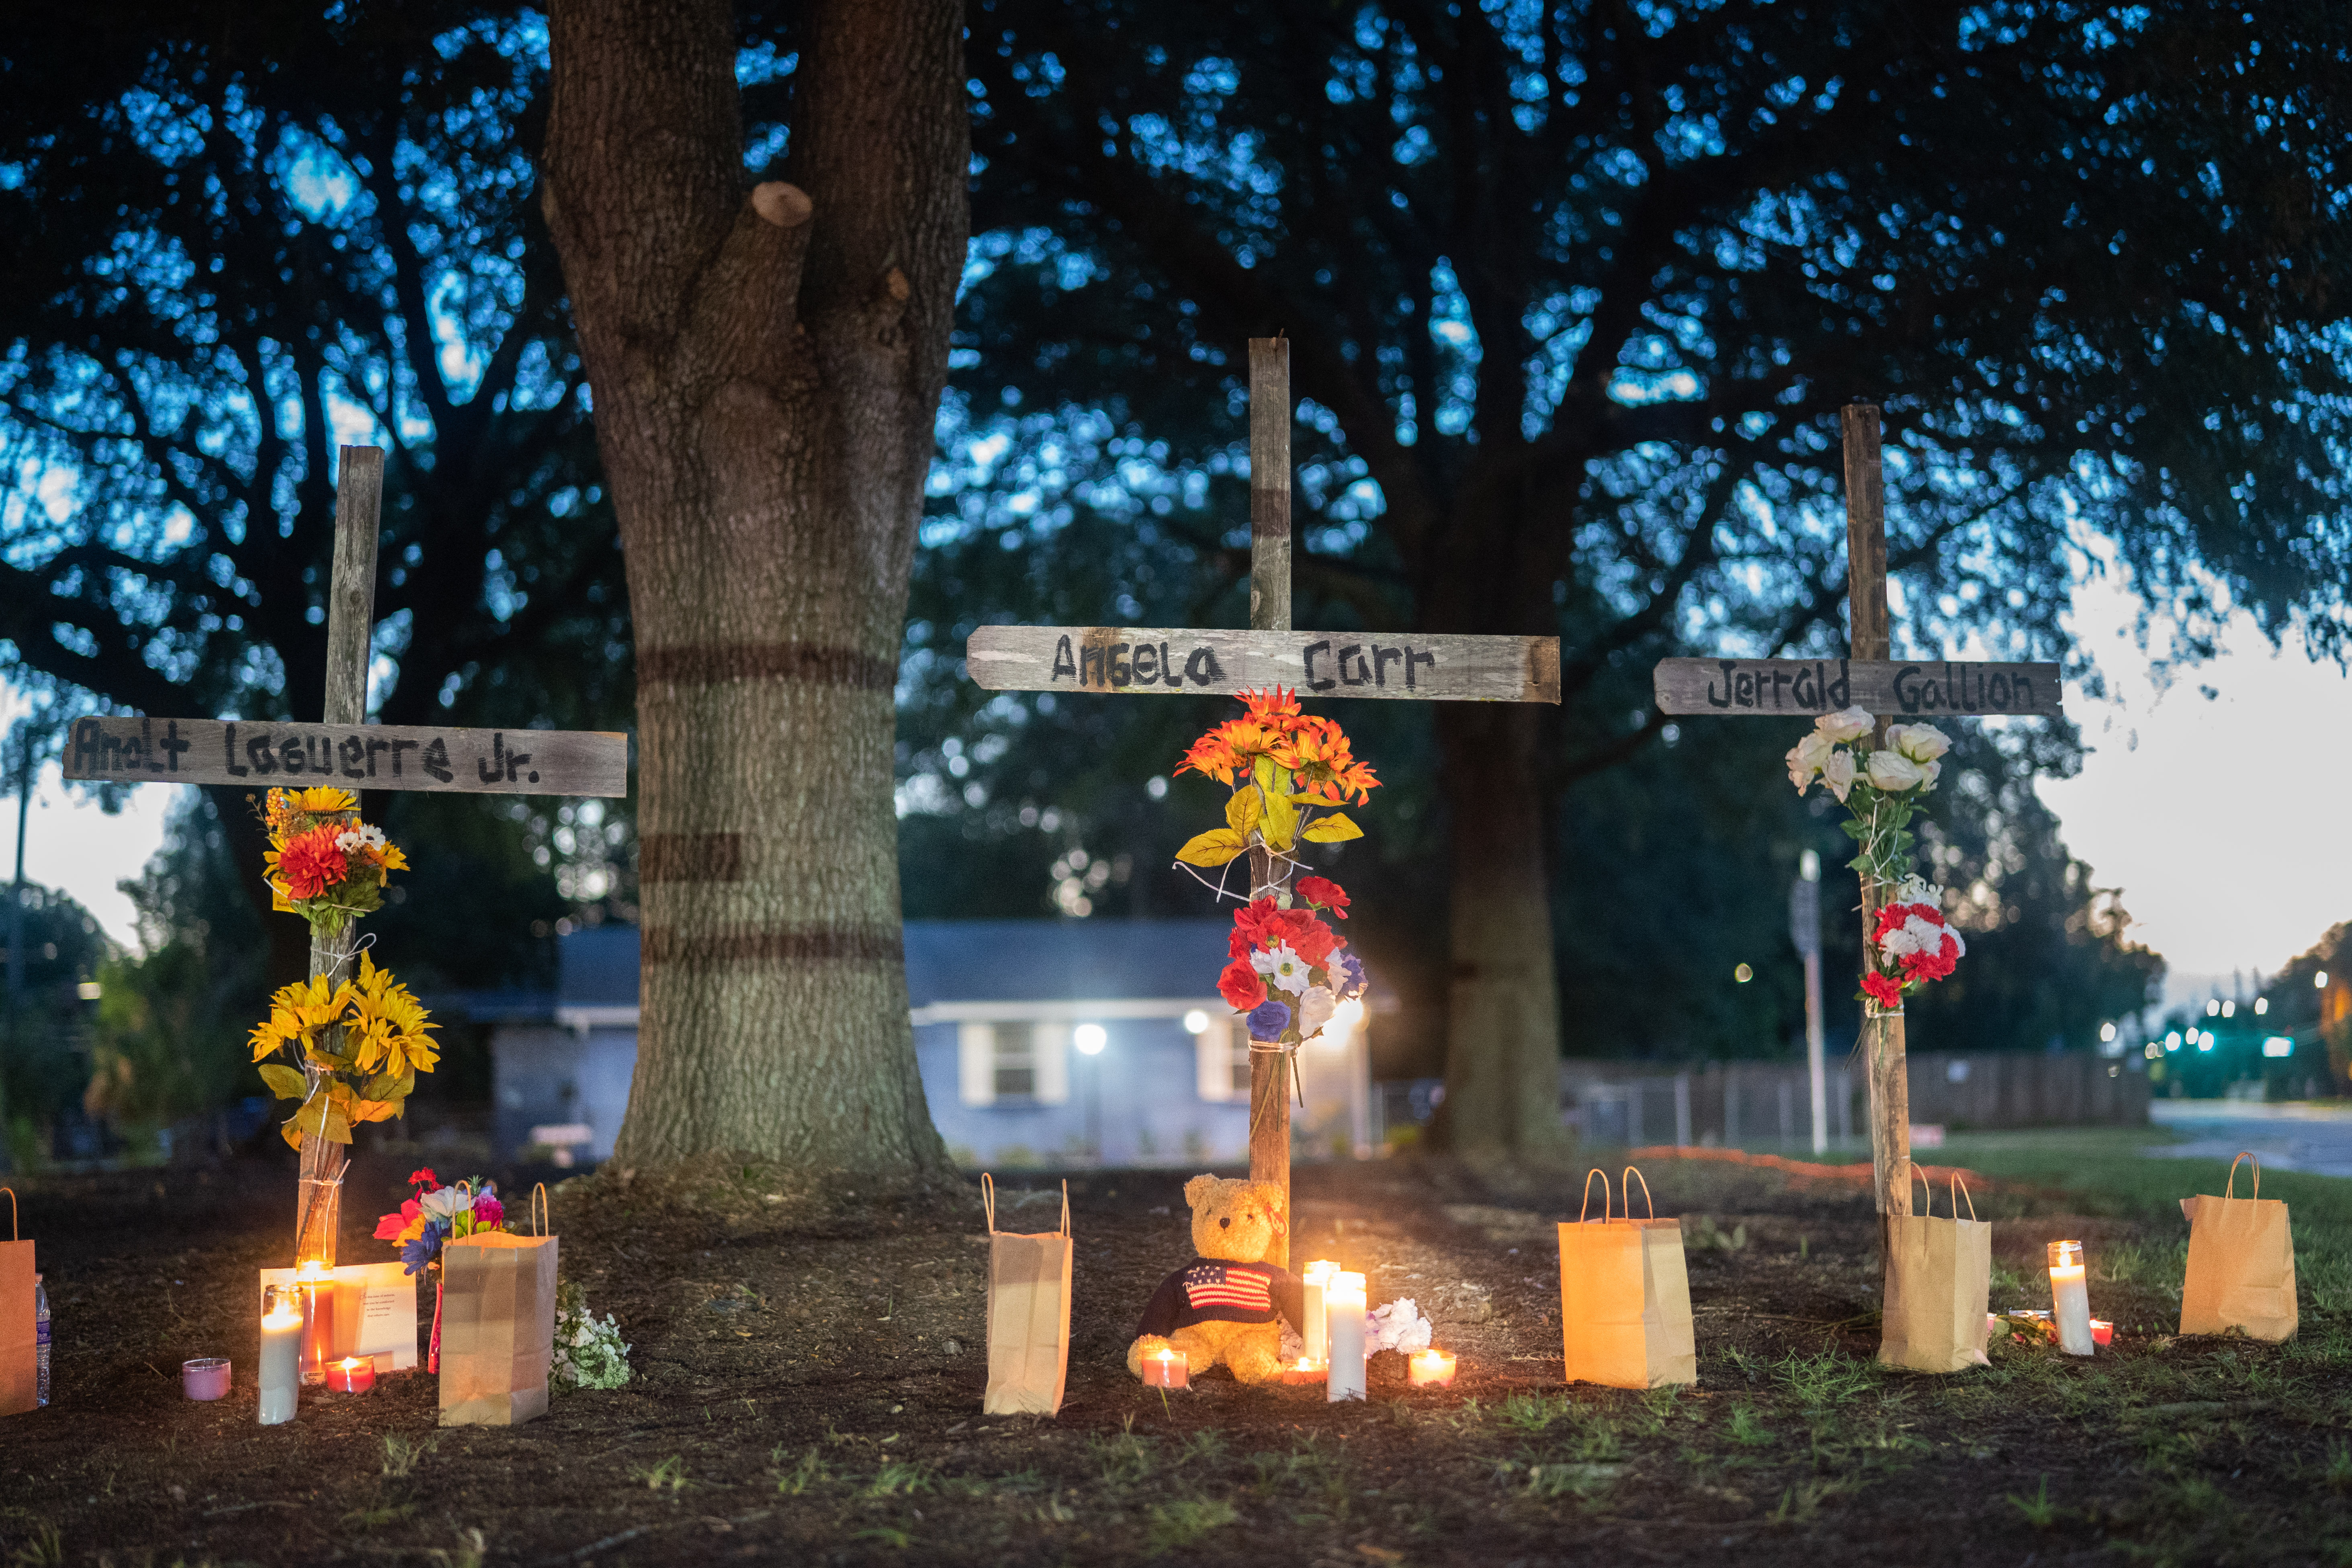 Three white crosses with names stand among tall trees in the yard of a house. Lit candles and luminaria surround them on the ground, with other mementos.